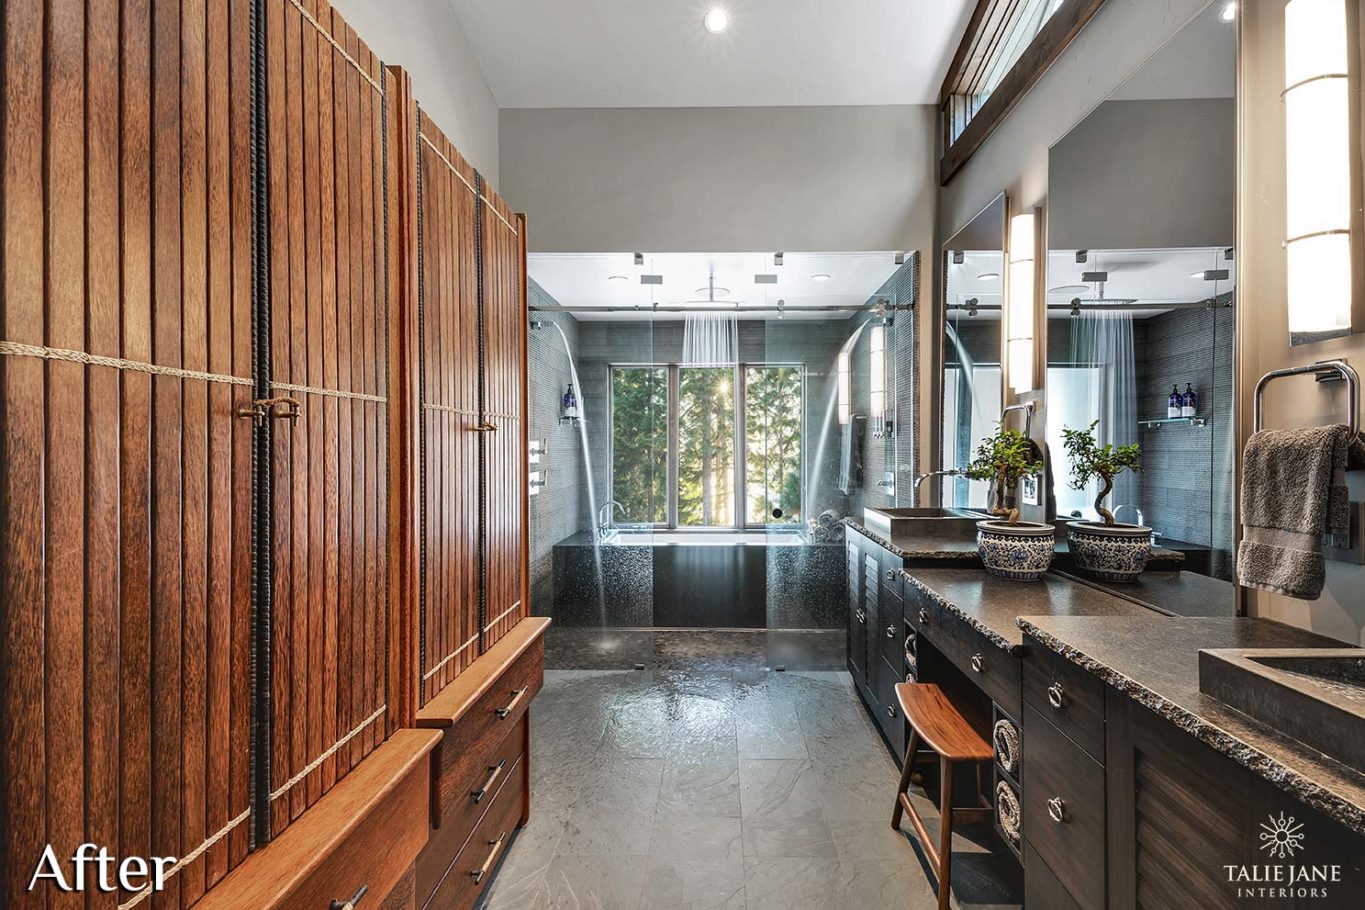 A grand washroom with wooden cabinets and stop tops